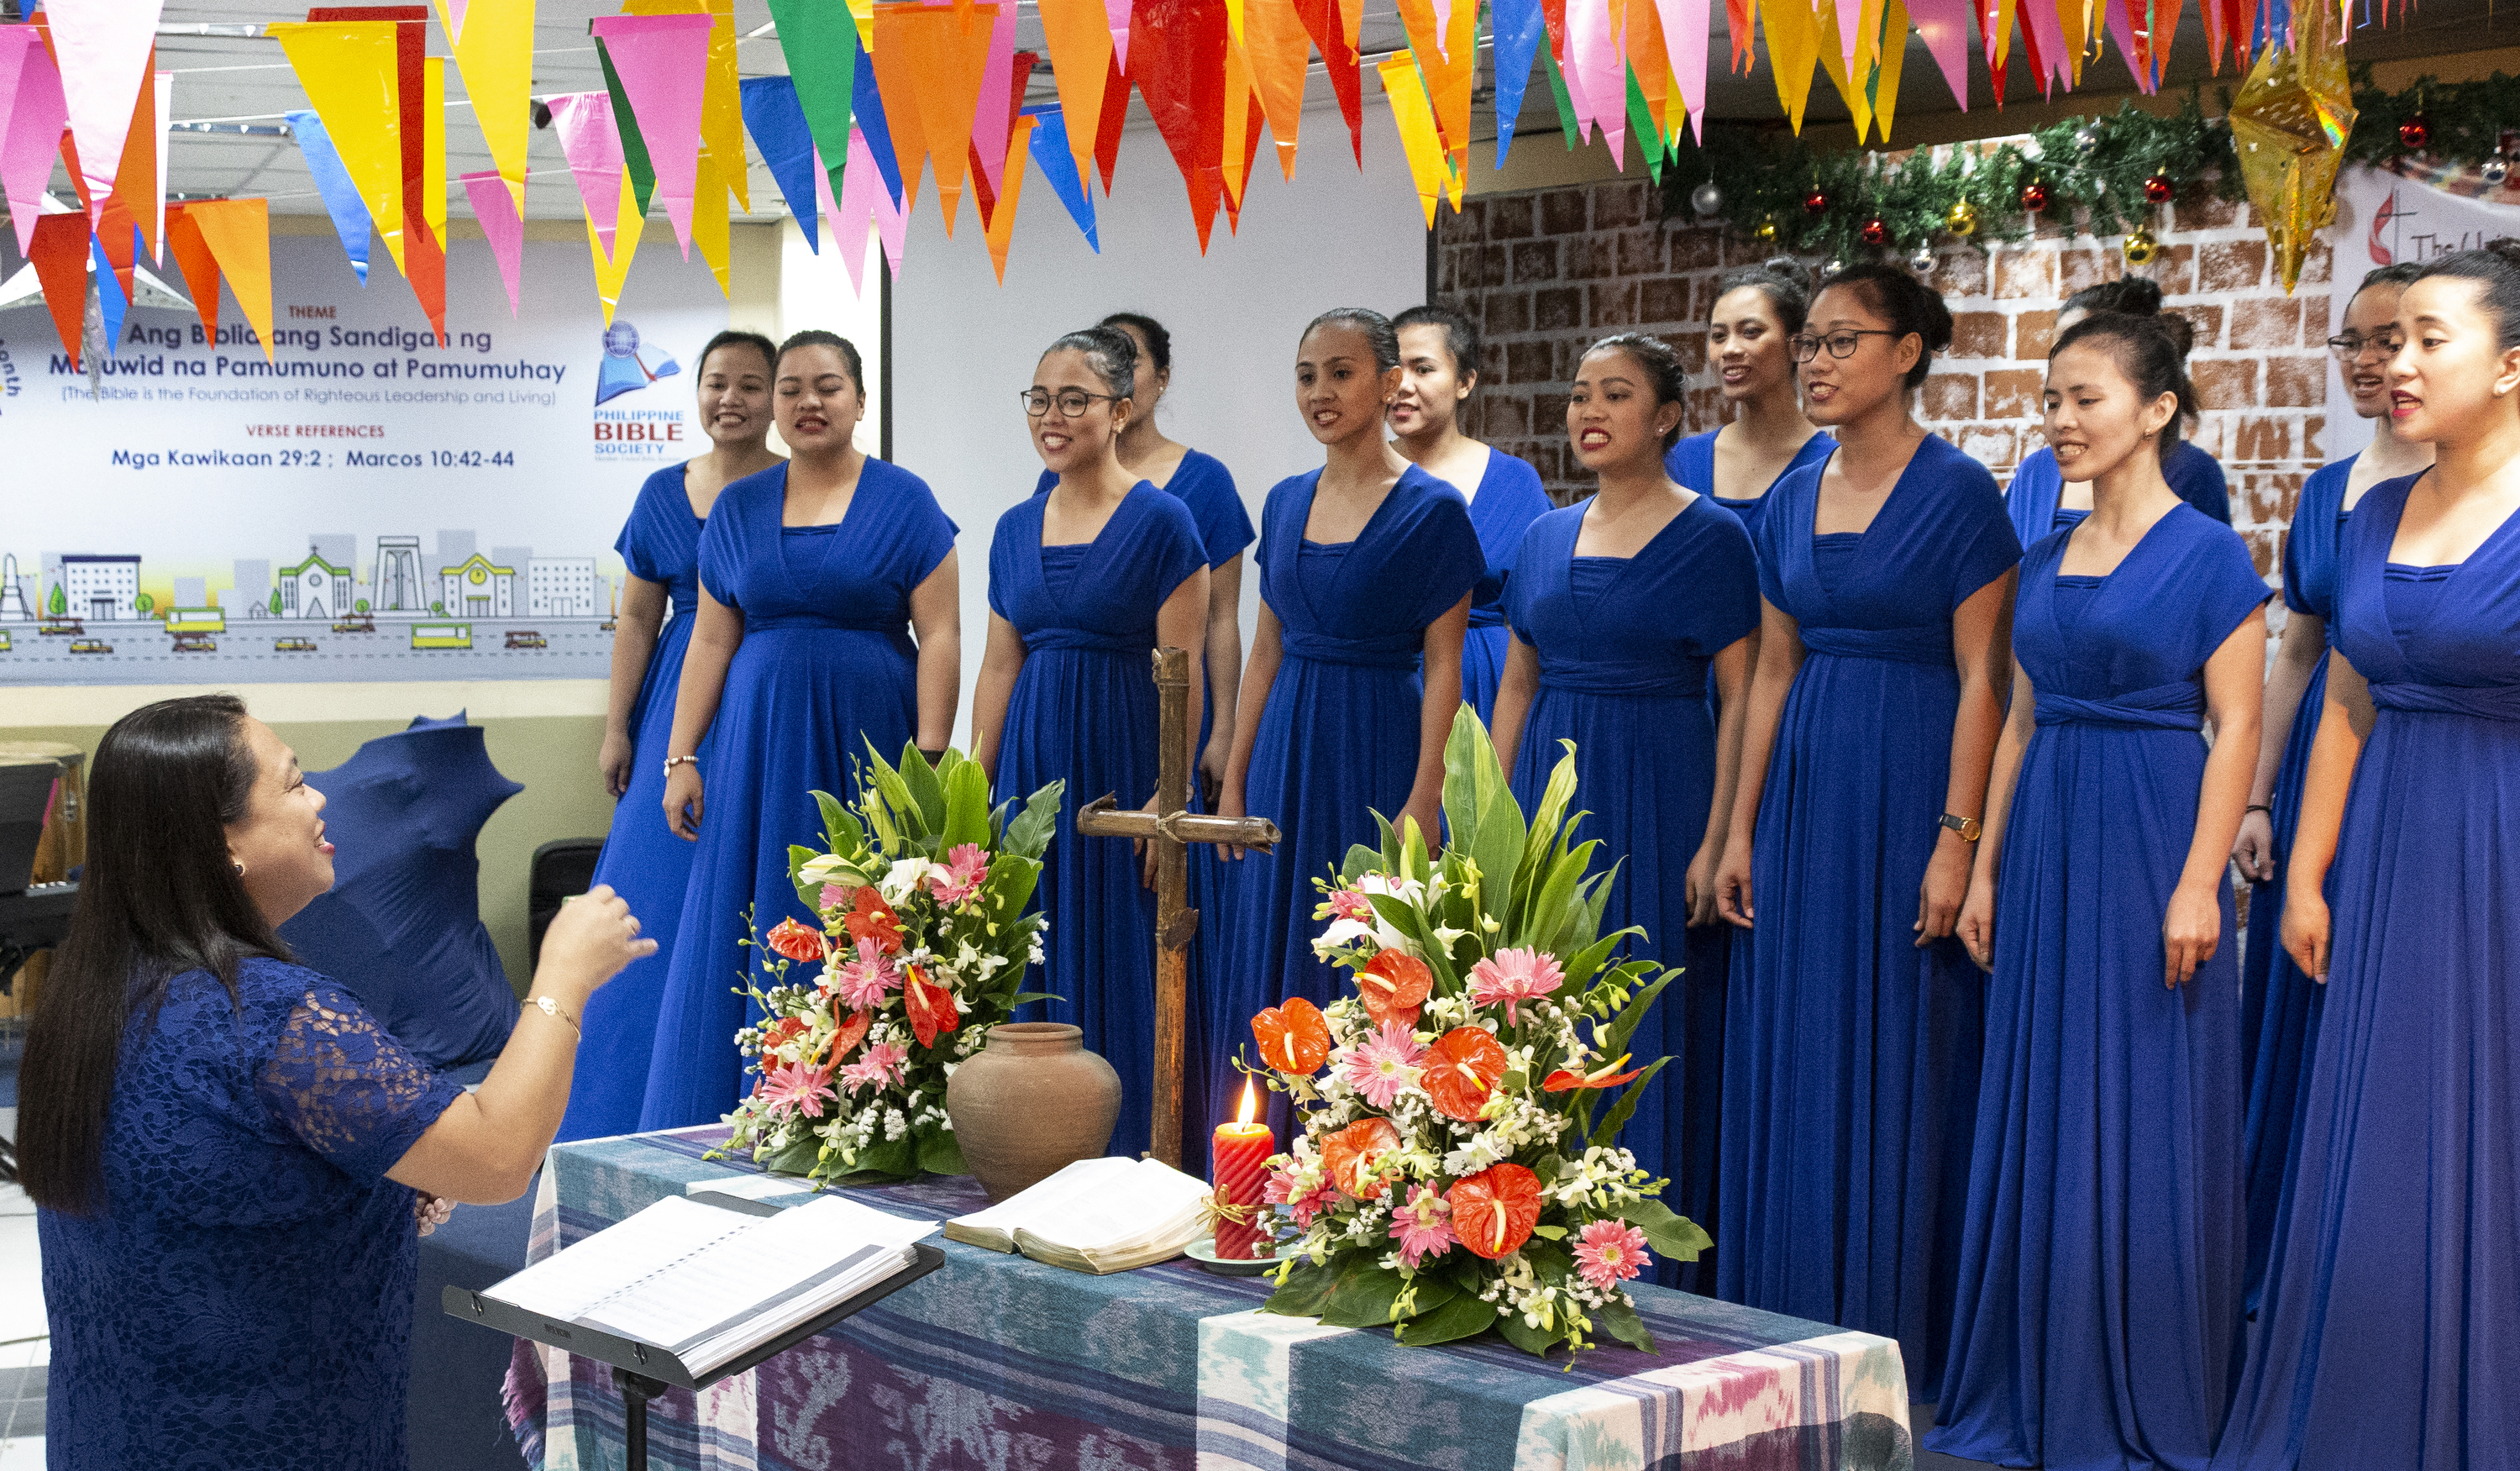 The Harris Memorial College Choraliers sing during the dedication ceremony. Photo by Tim Tanton, UMNS.